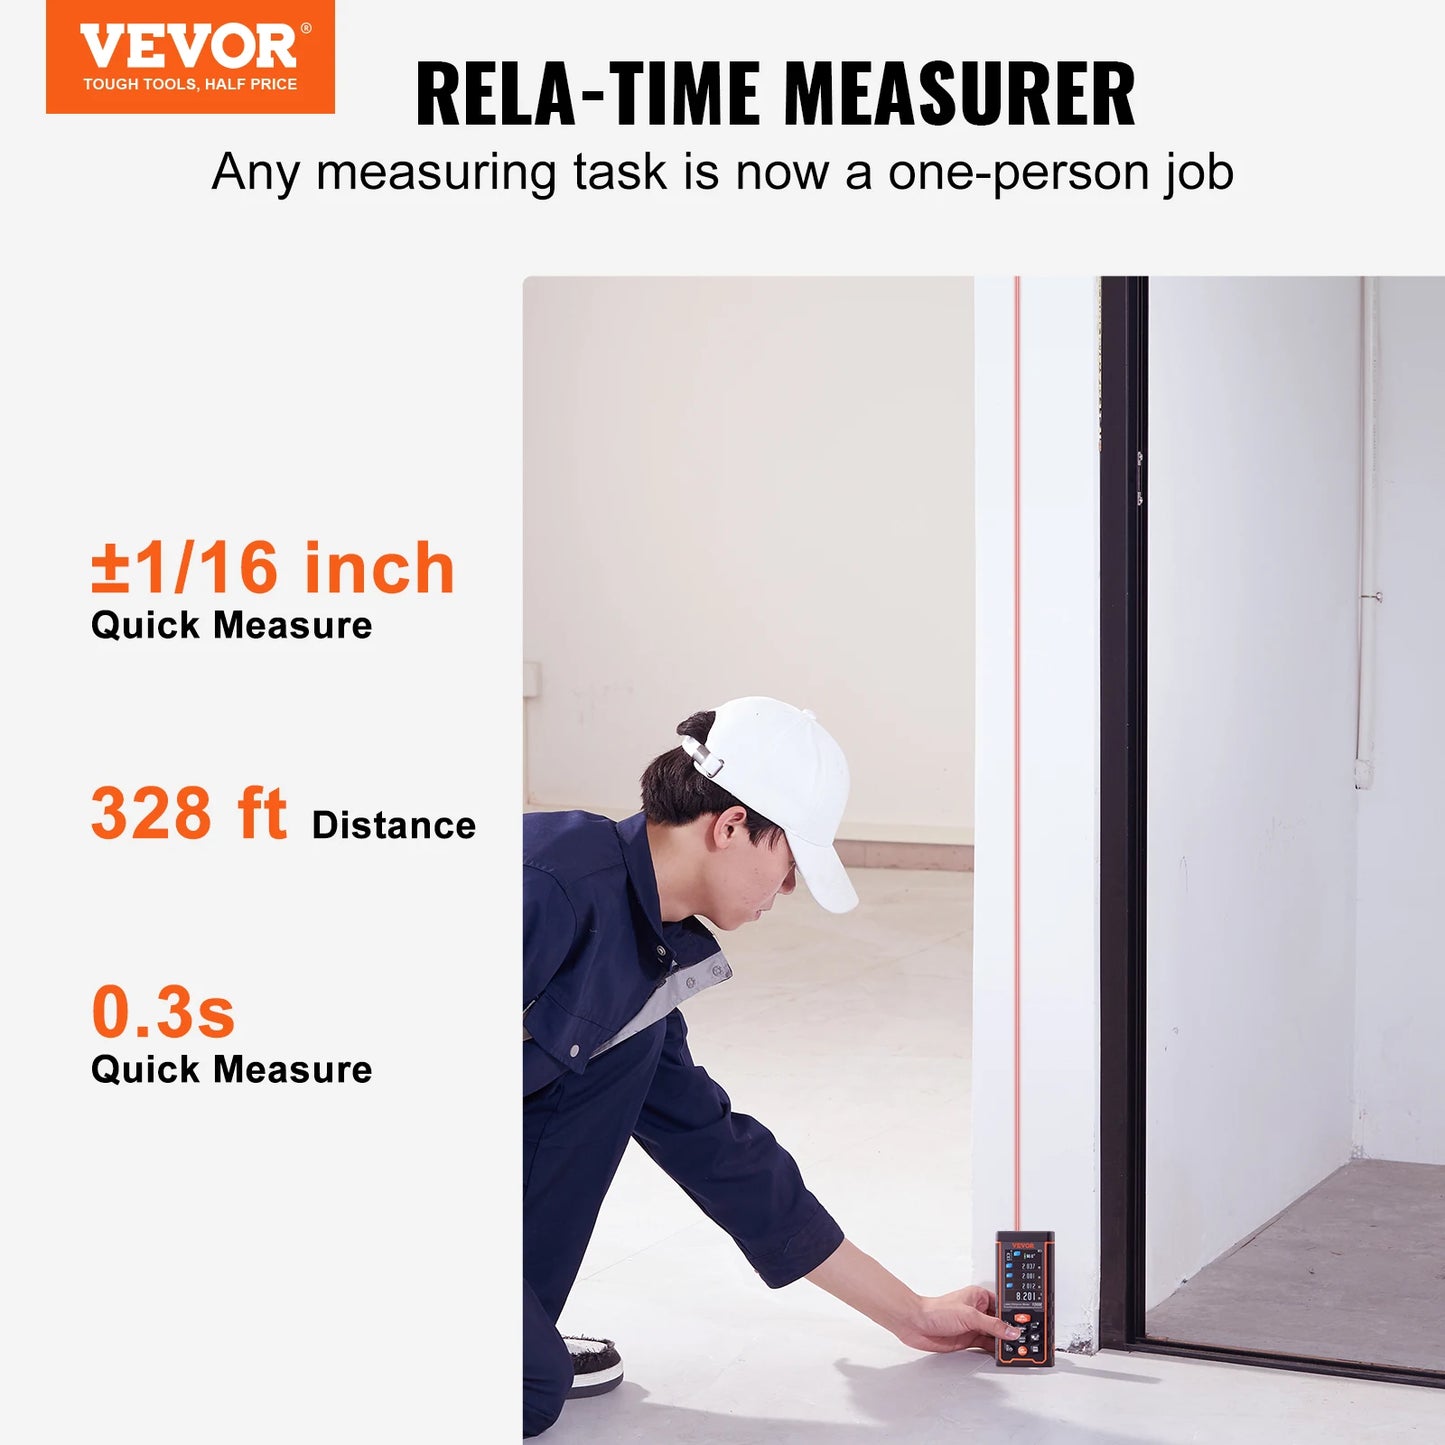 VEVOR Measure Accuracy Laser Distance Colorlit LCD Screen